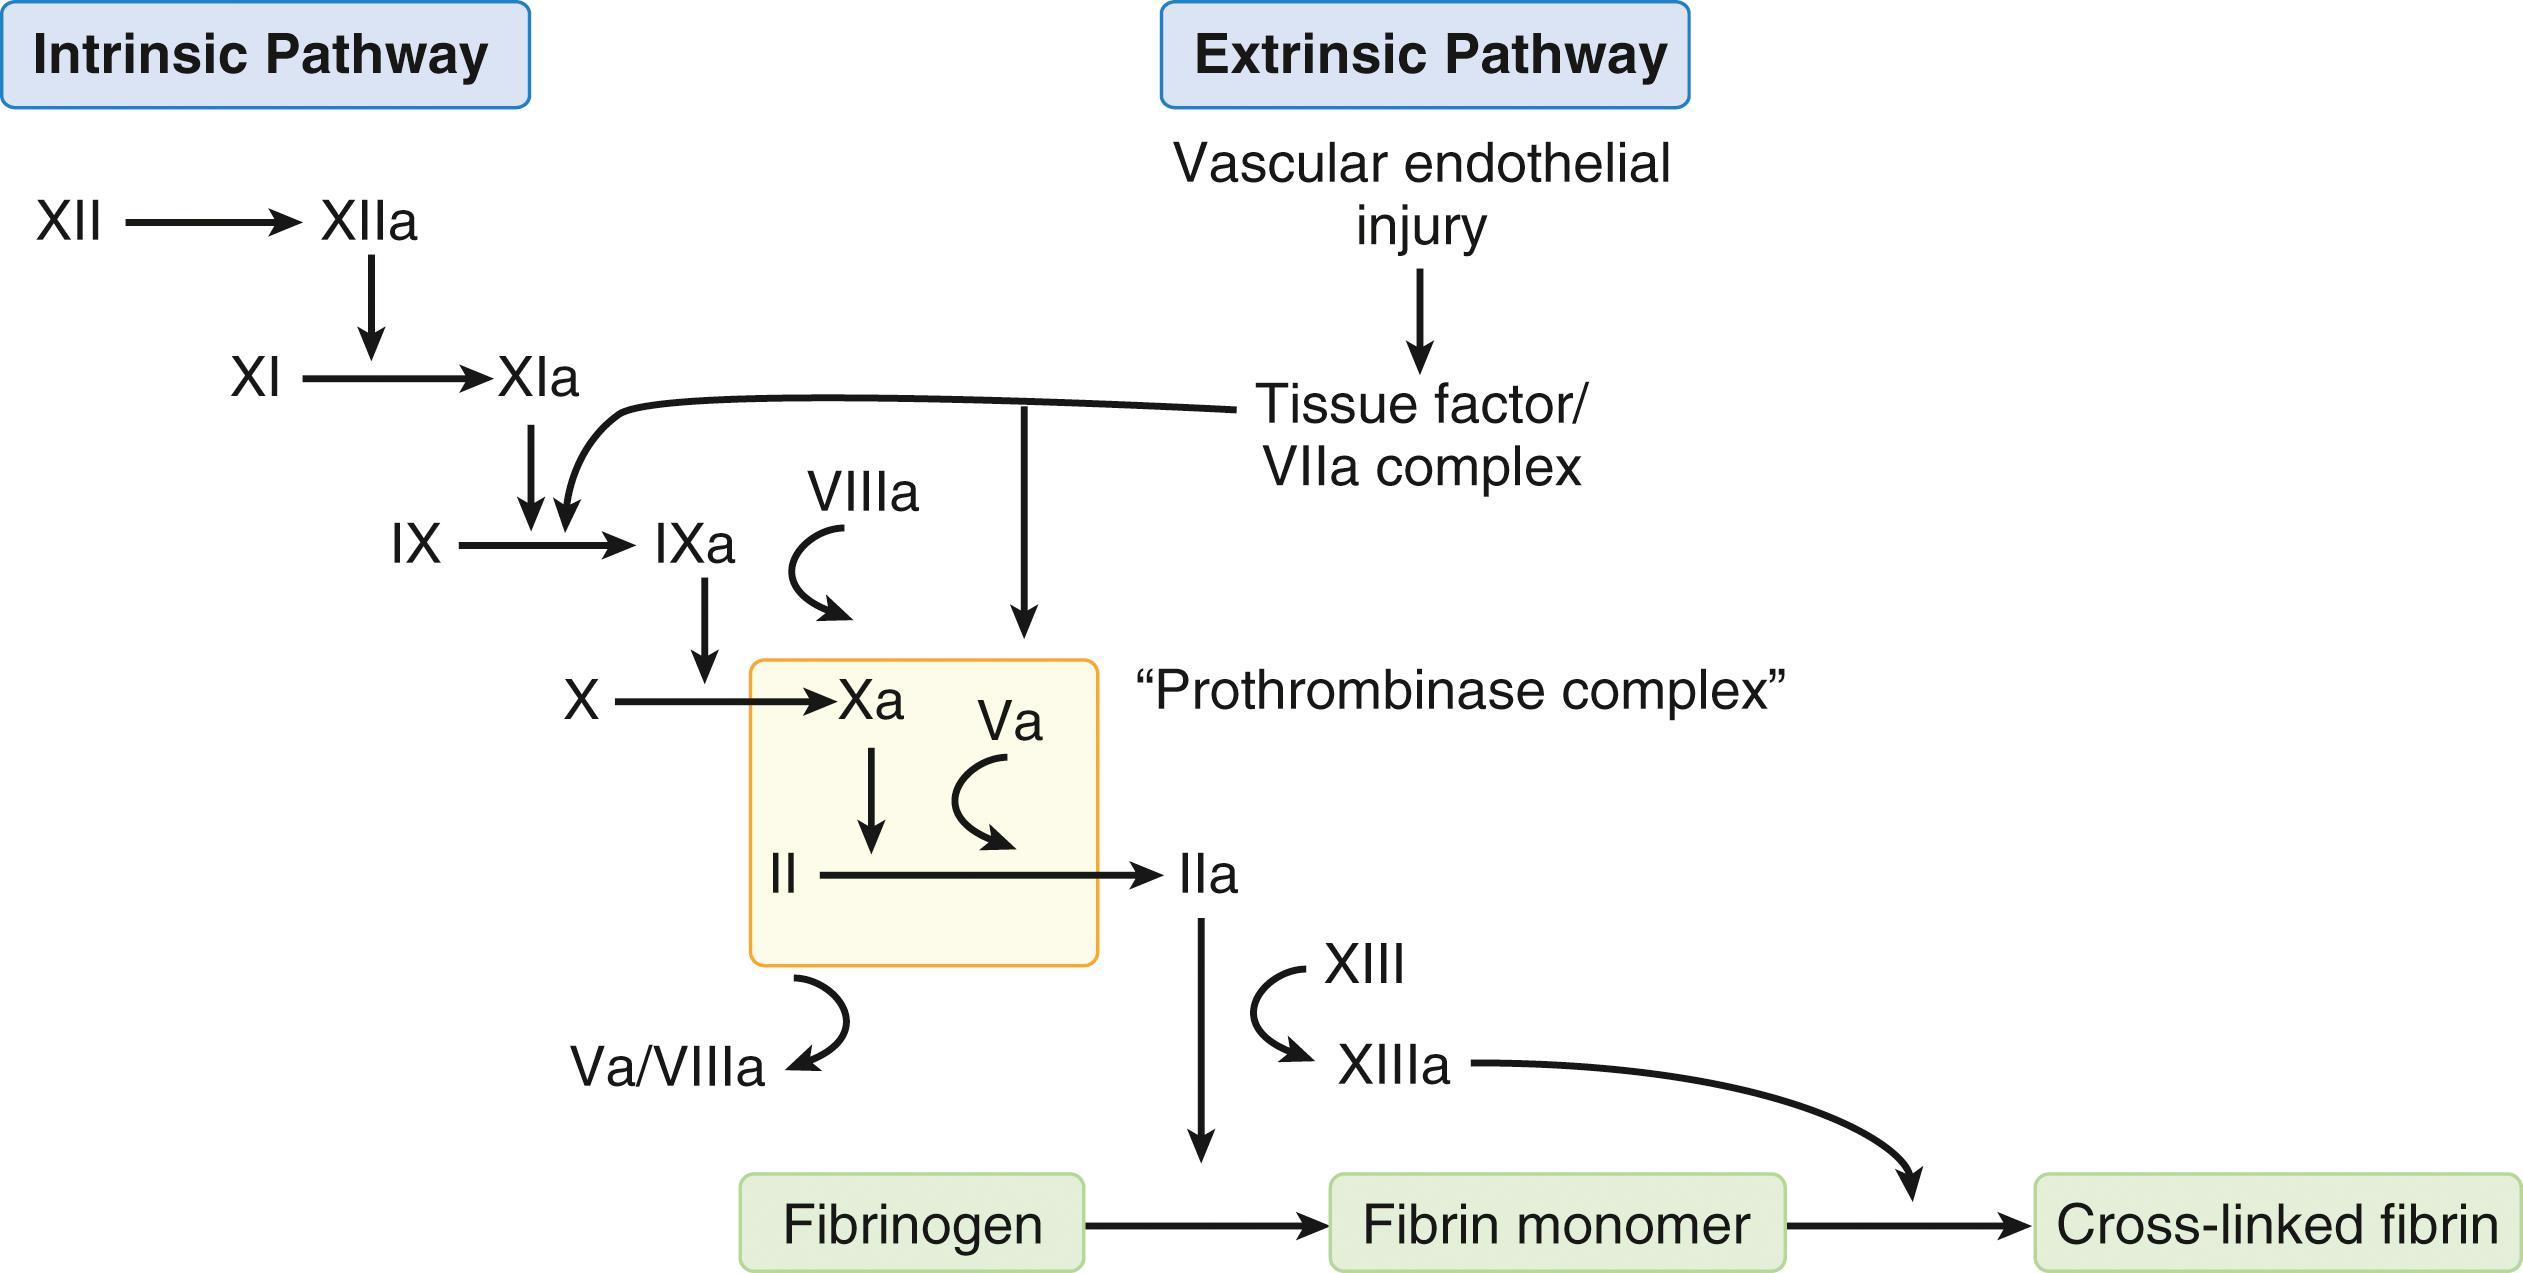 Fig. 23.2, Classic Coagulation Cascade. The coagulation cascade has been depicted as extrinsic (initiated by vascular injury) and intrinsic (because of contact activation) pathways, both of which culminate in a common pathway of thrombin (factor II) activation, which then converts fibrinogen to fibrin. The extrinsic pathway begins with exposure of blood plasma to tissue factor (TF) after injury to the vascular wall. The TF/factor VIIa complex activates factor IX of the intrinsic pathway, binds to factor VIIIa, and forms intrinsic tenase, which activates factor X. The intrinsic pathway then subsequently amplifies and propagates the hemostatic response to increase overall thrombin generation.